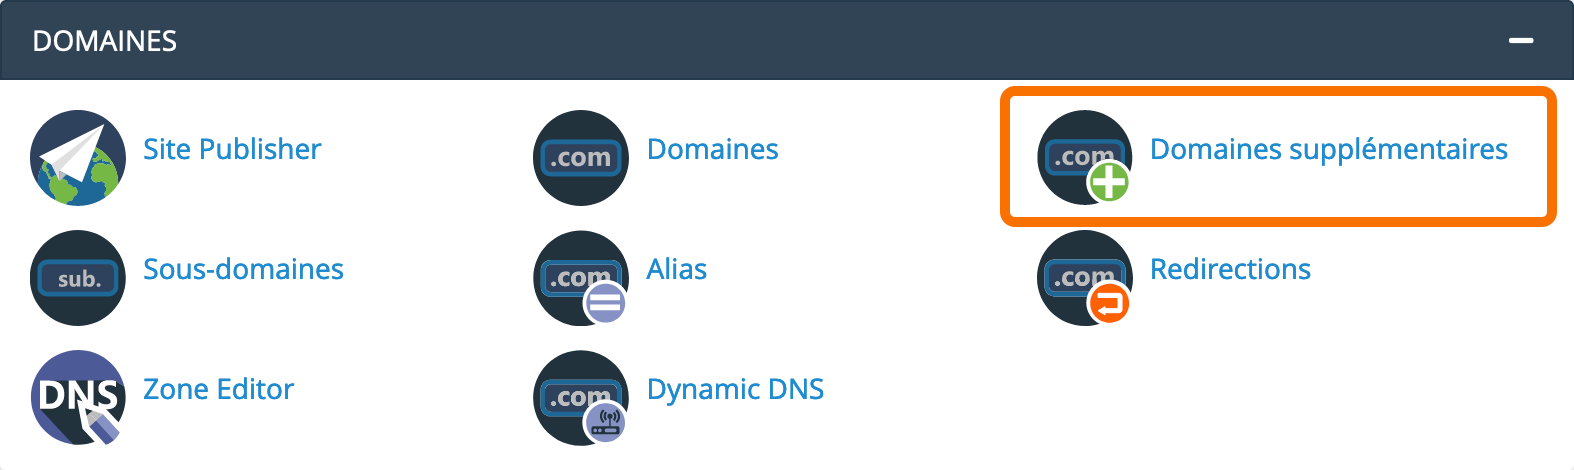 cpanel-domaines-supplementaires.png